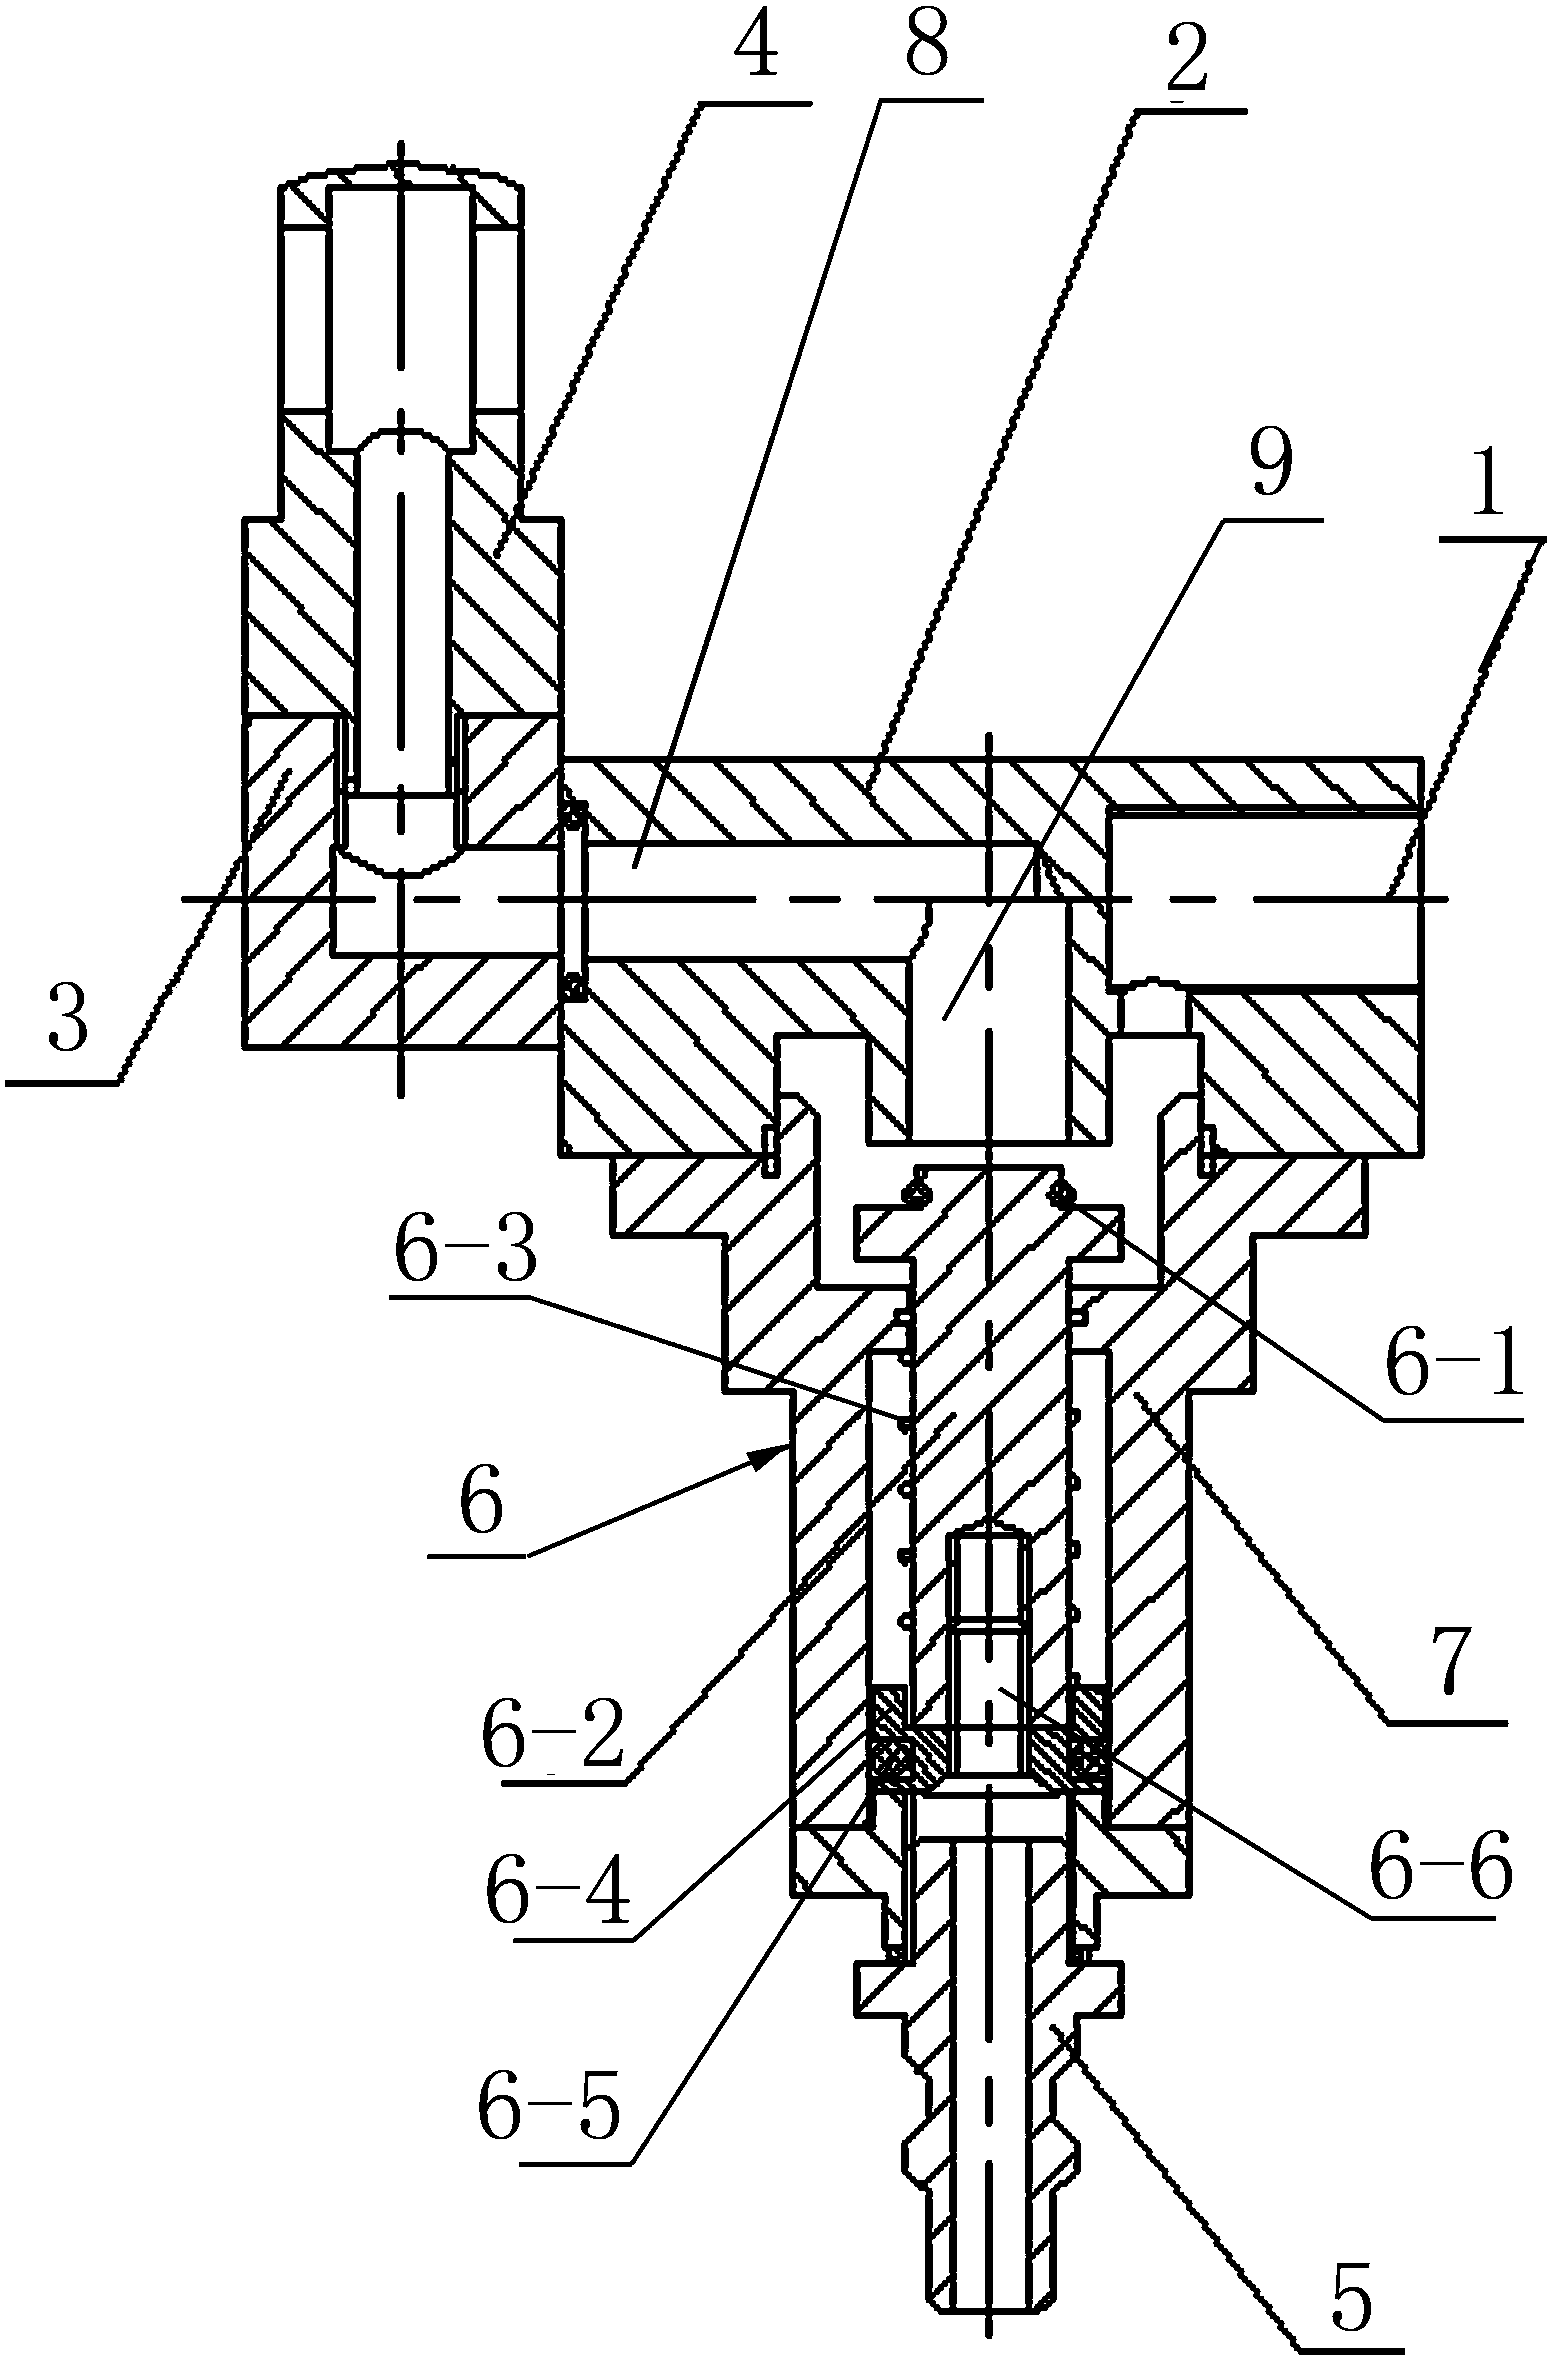 Engine forced flameout device